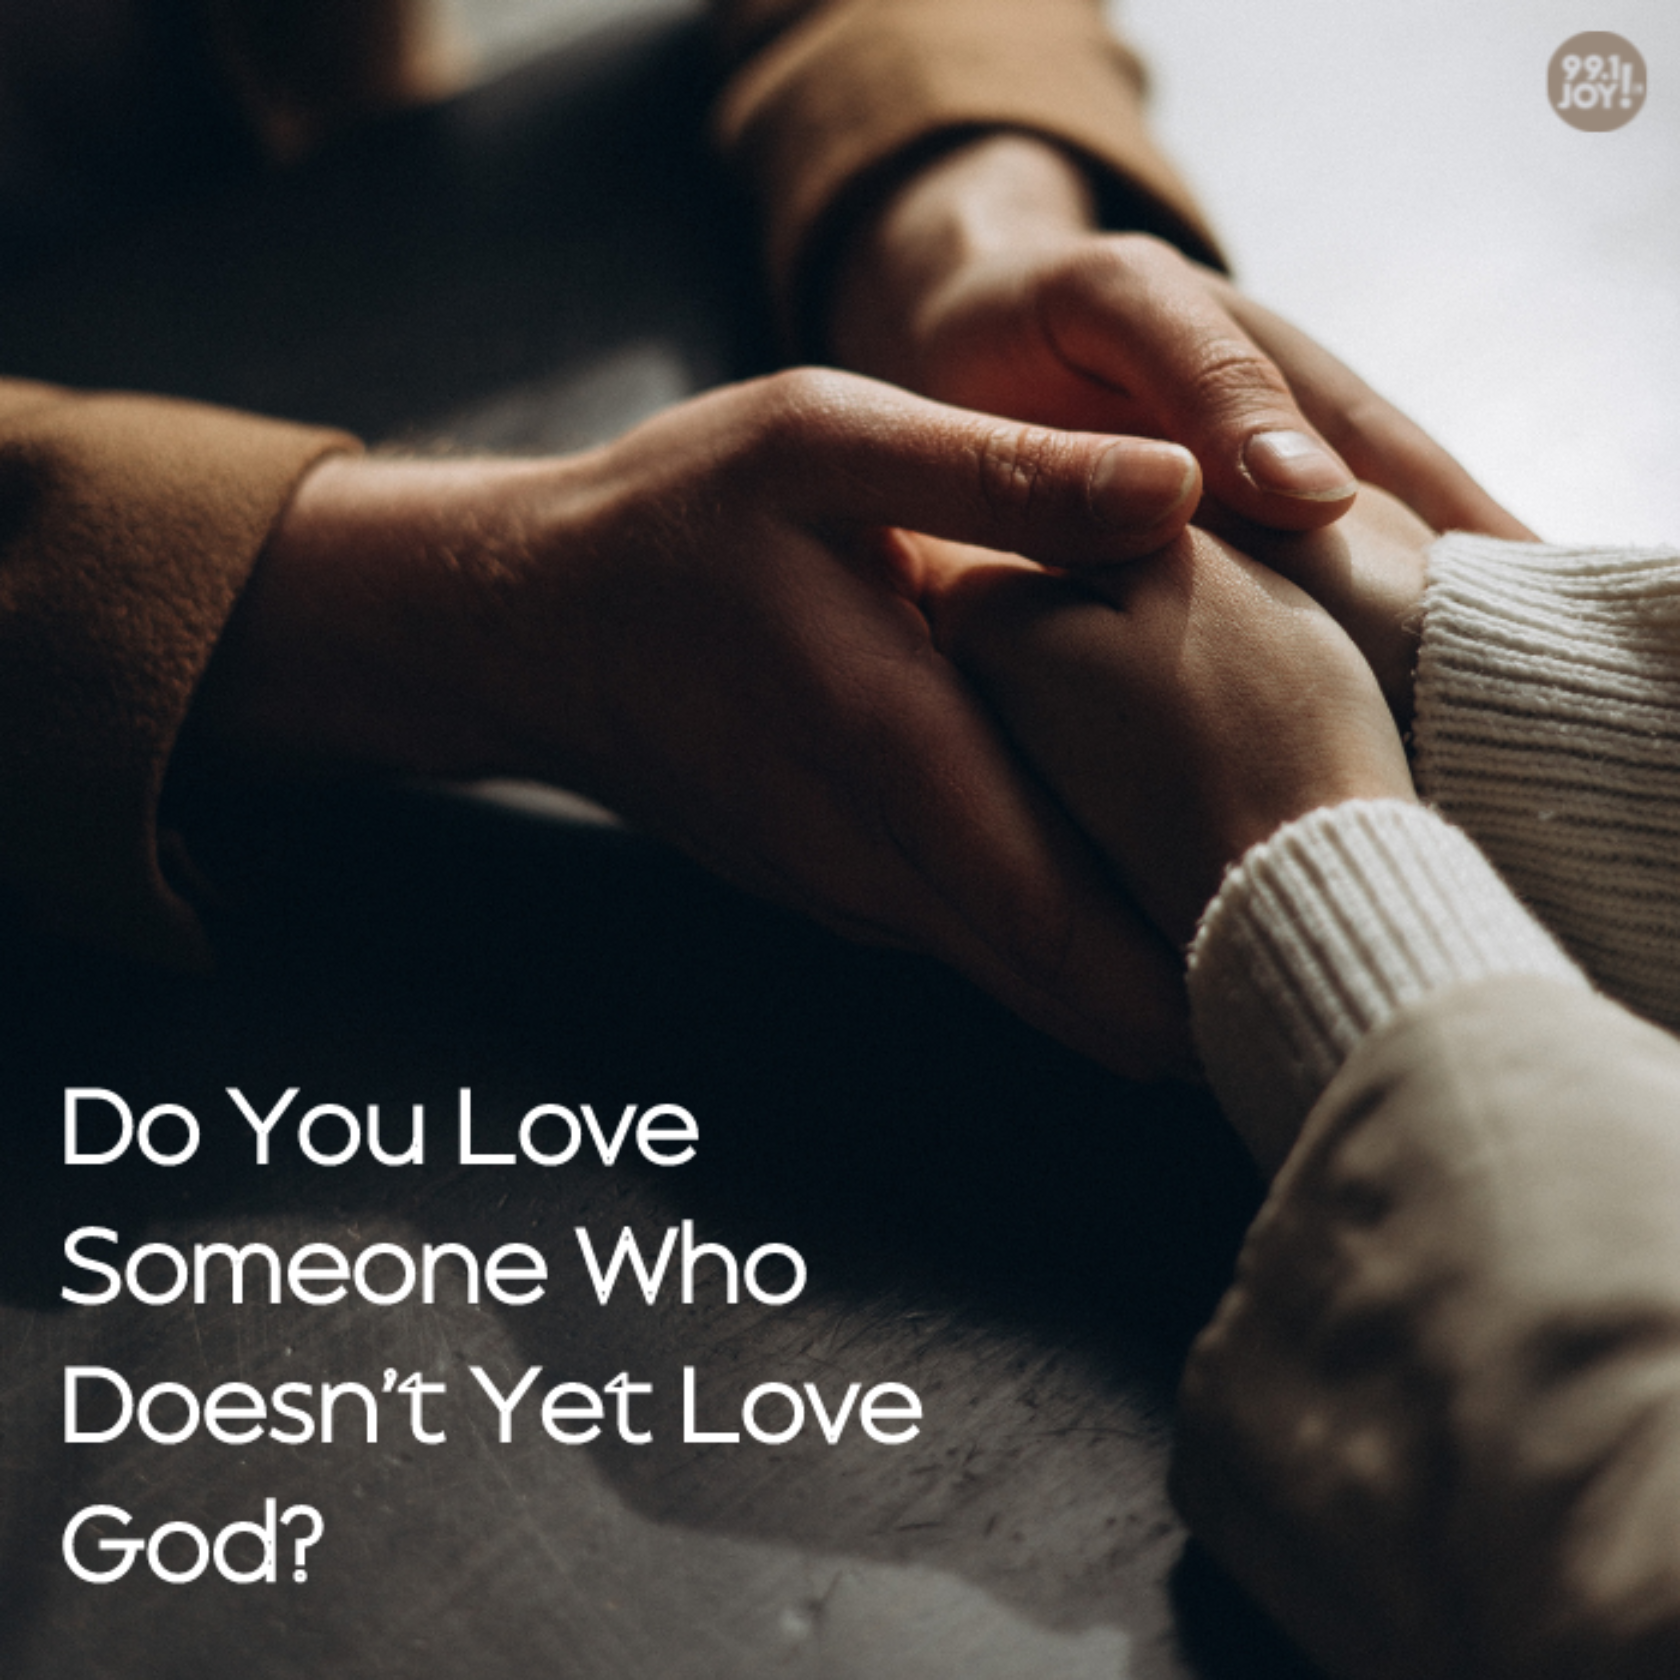 Do You Love Someone Who Doesn’t Yet Love God?